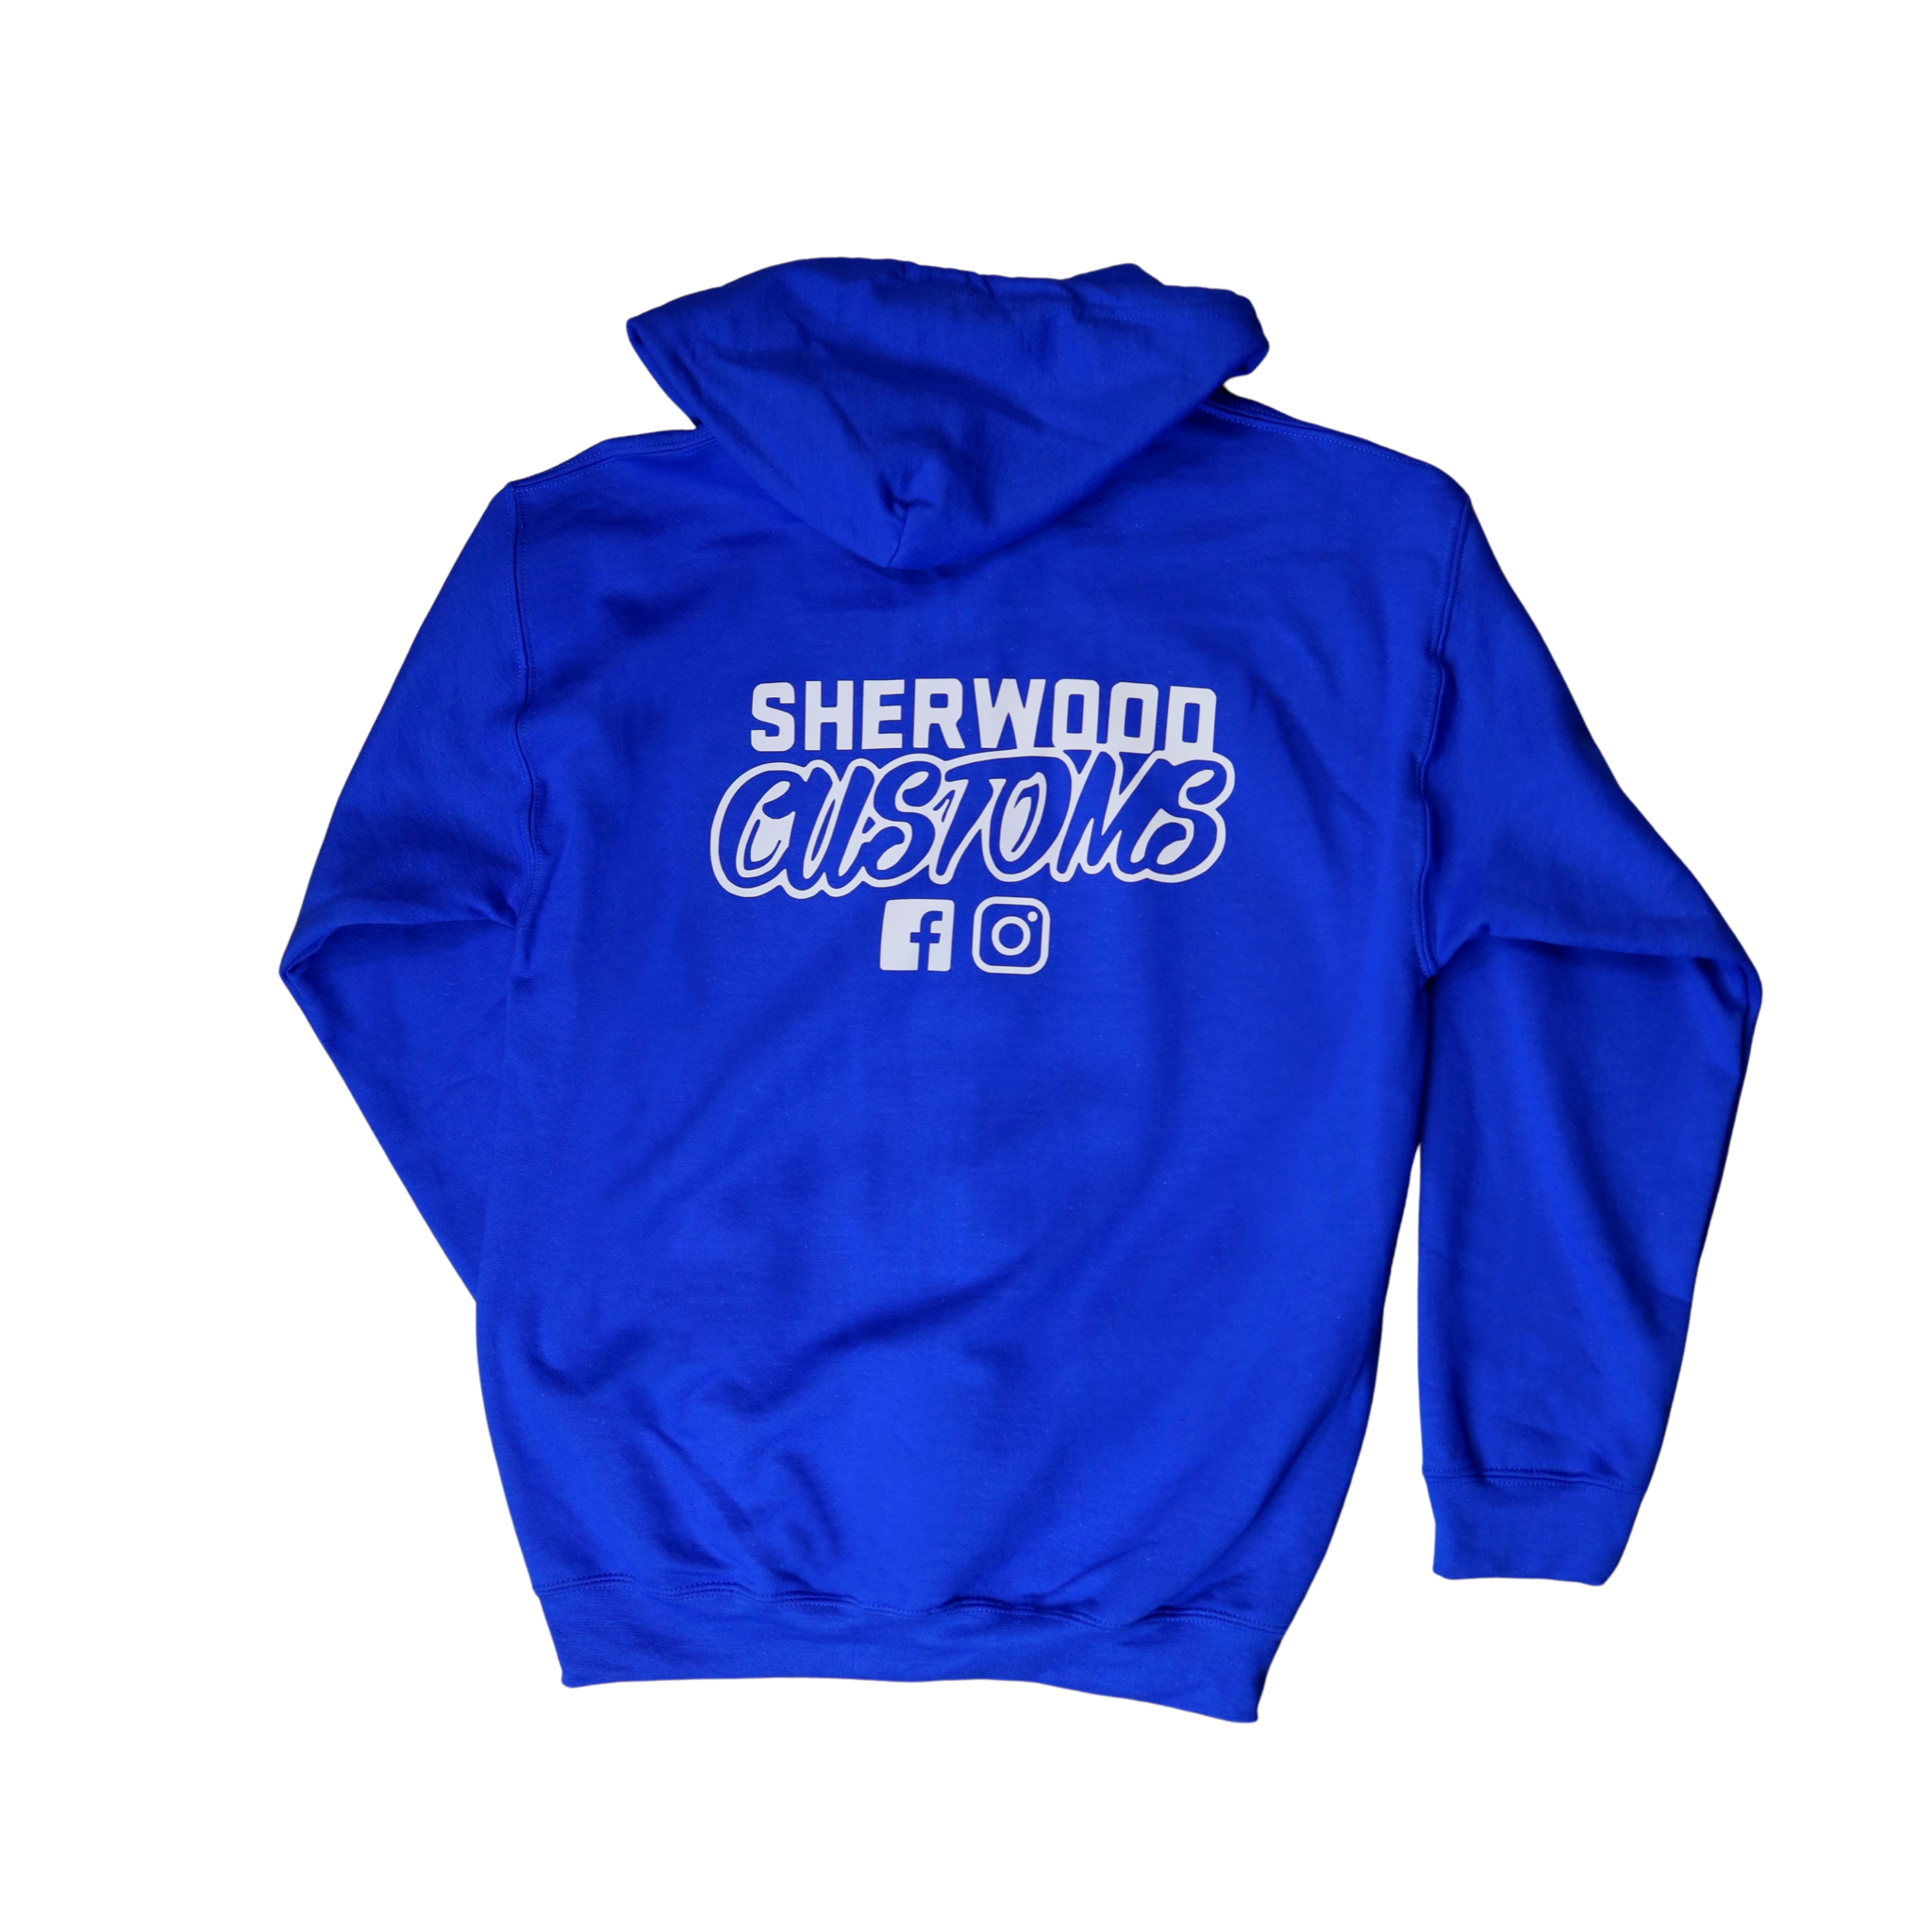 Sherwood Customs Royal Blue with White Logo Pullover Hoodie